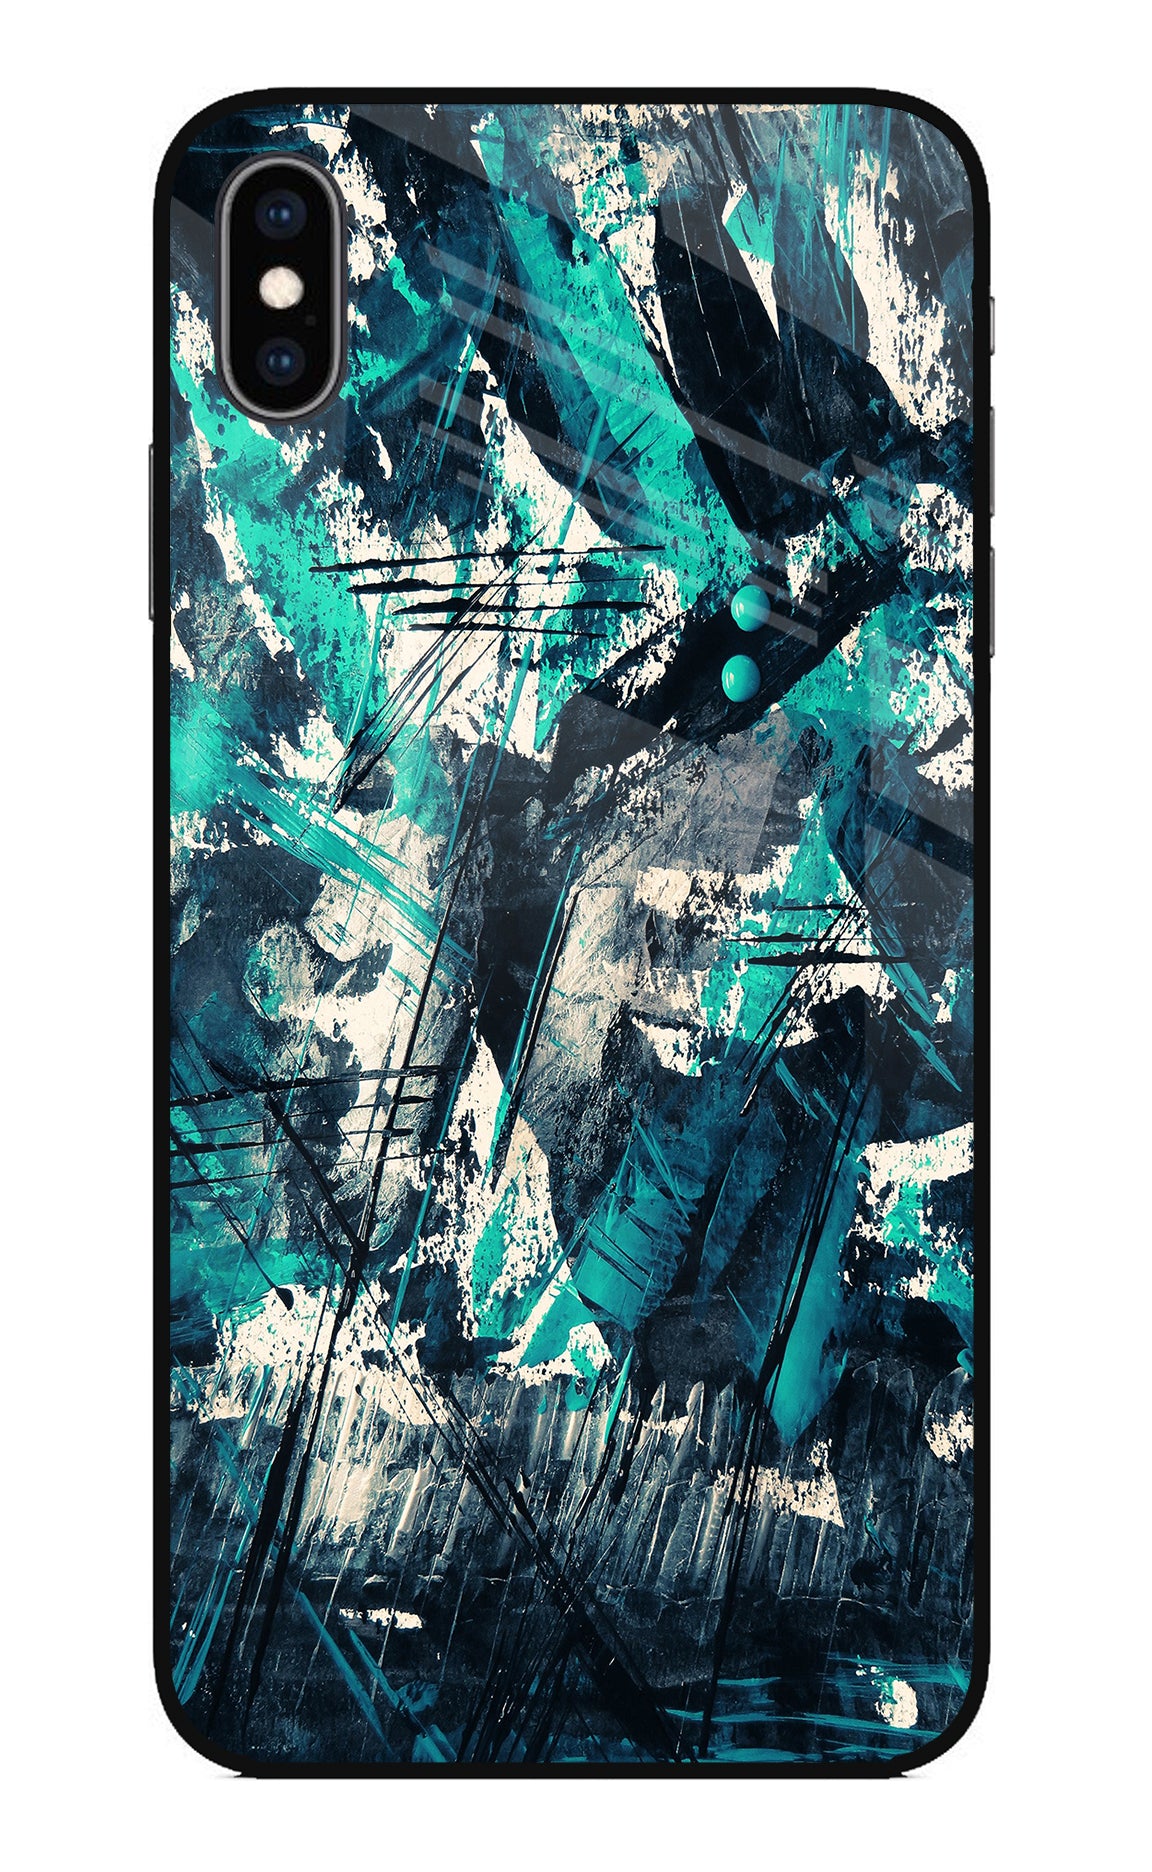 Artwork iPhone XS Max Back Cover